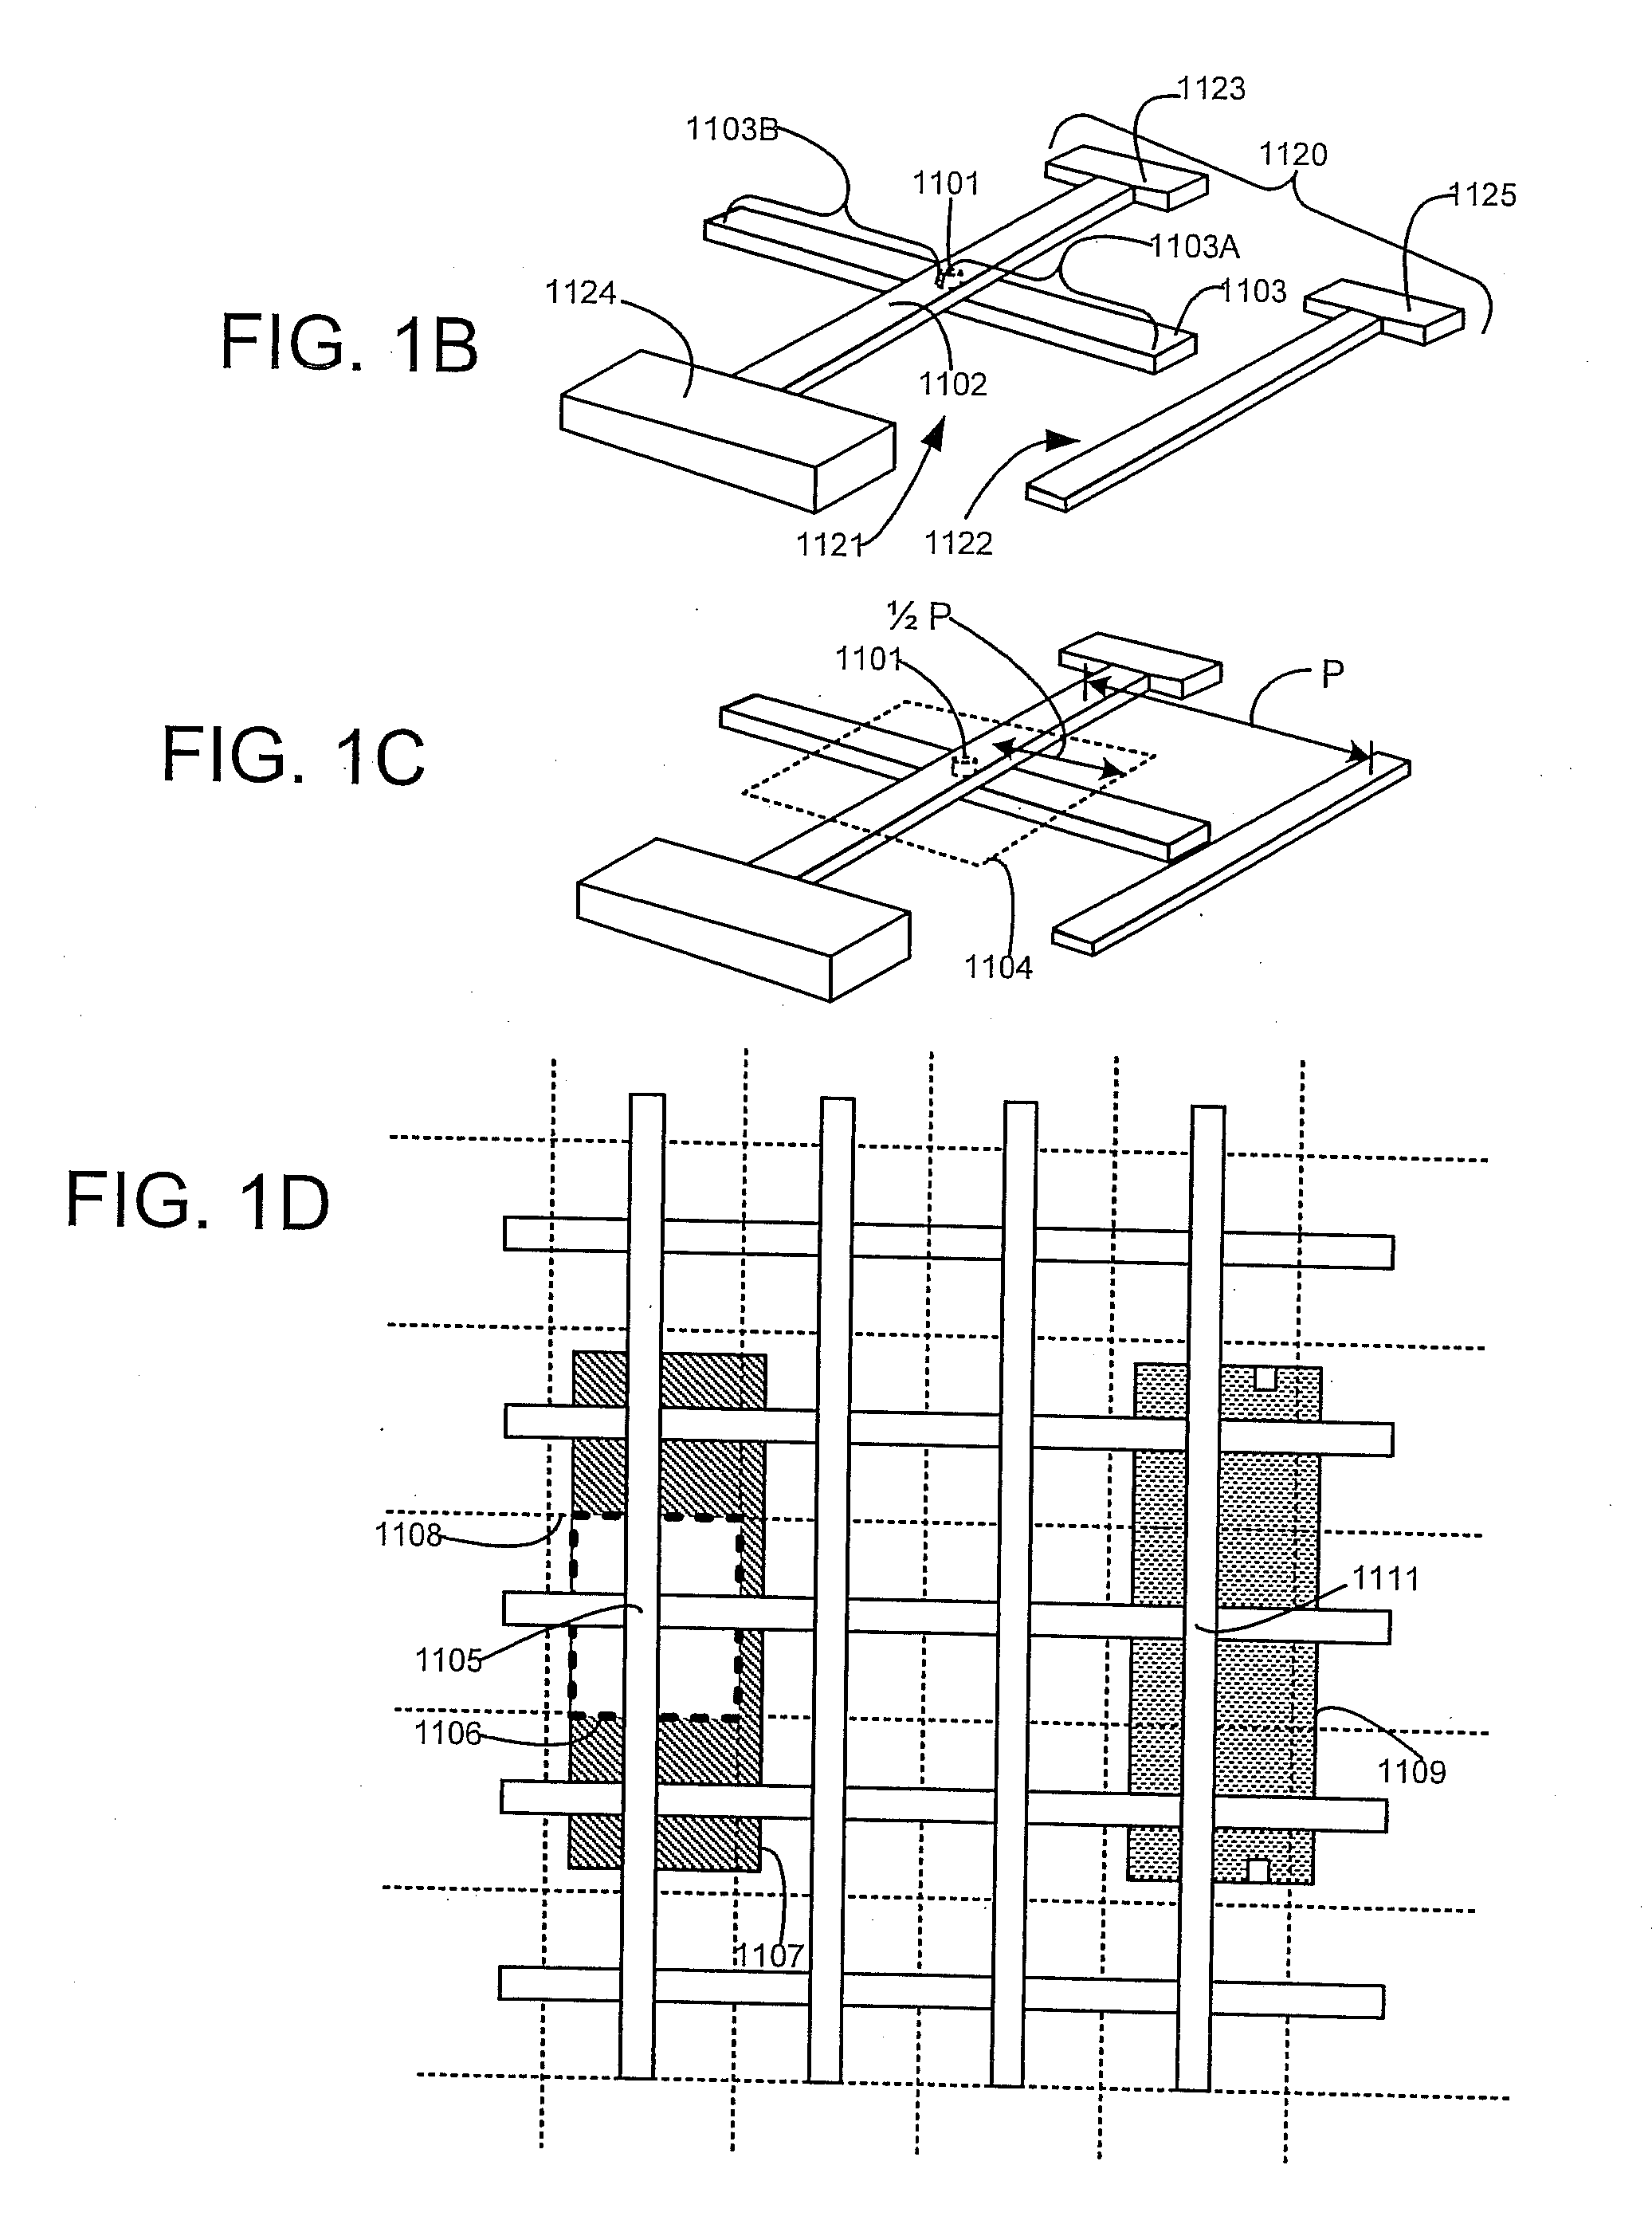 Power Network Analyzer For An Integrated Circuit Design